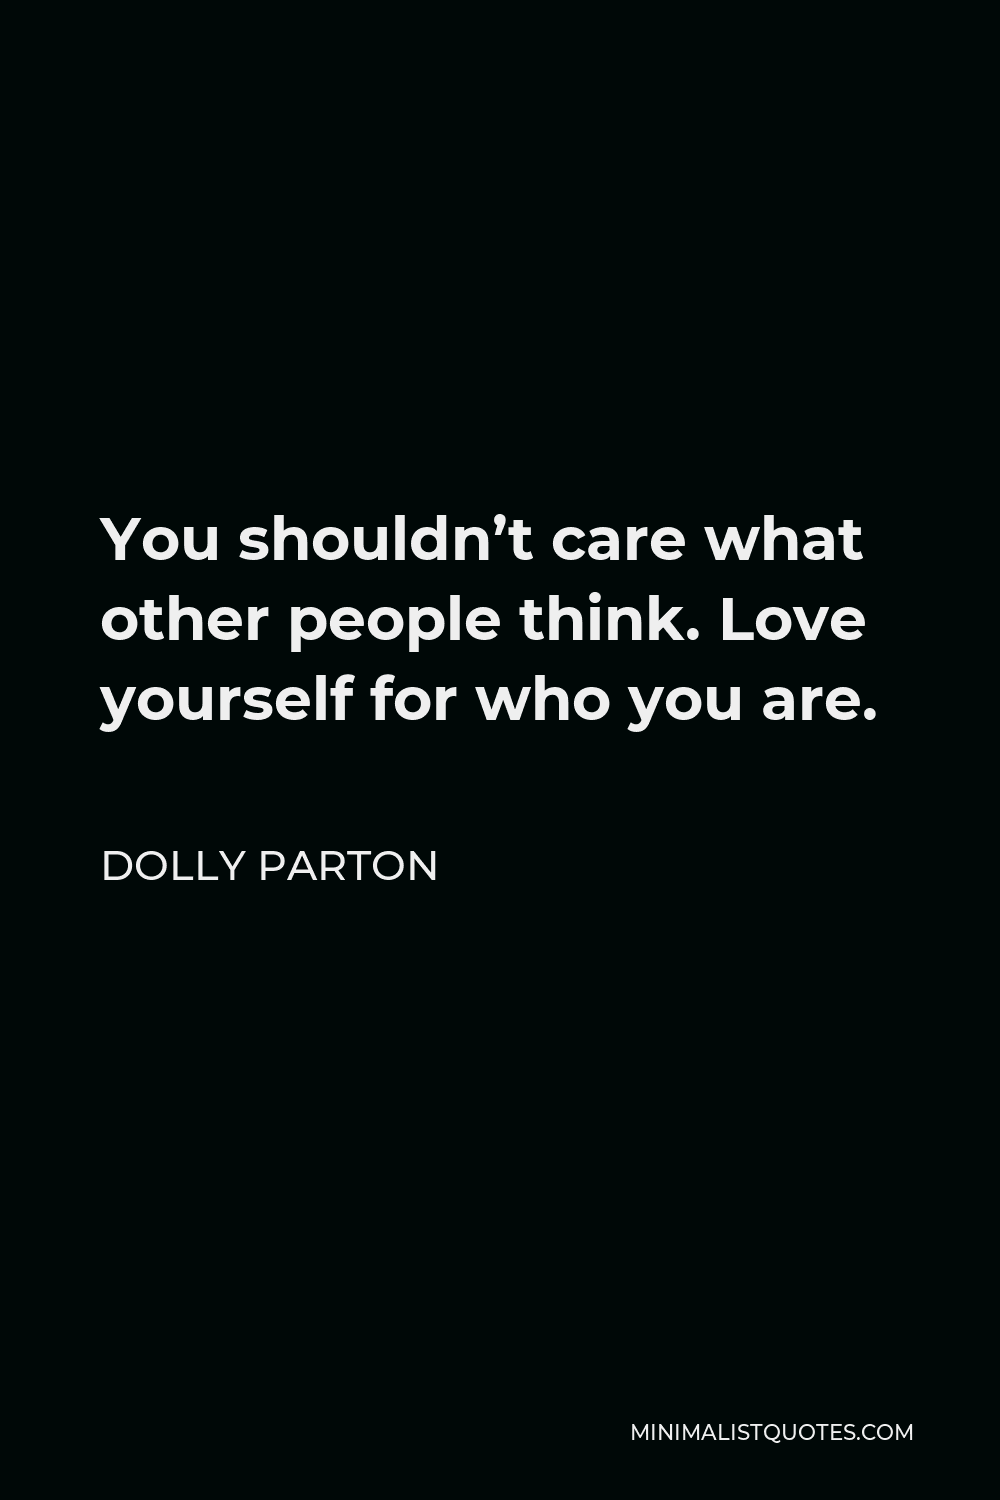 dolly parton think about love